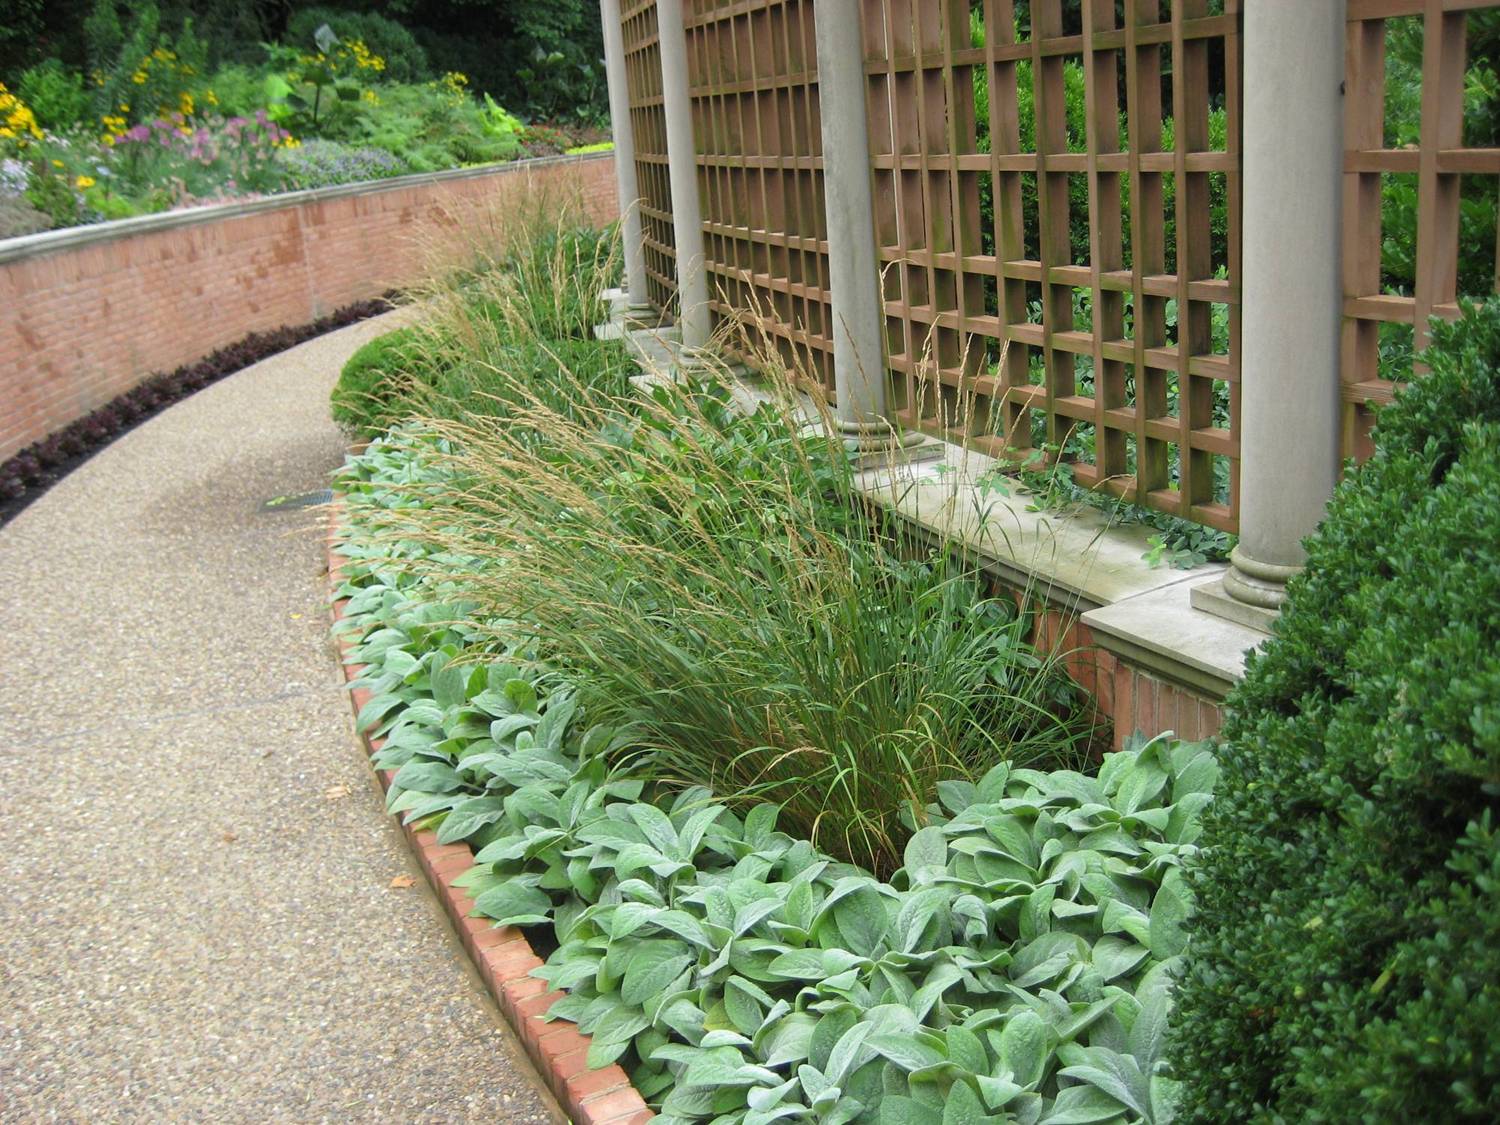 basic design principles and styles for garden beds | proven winners